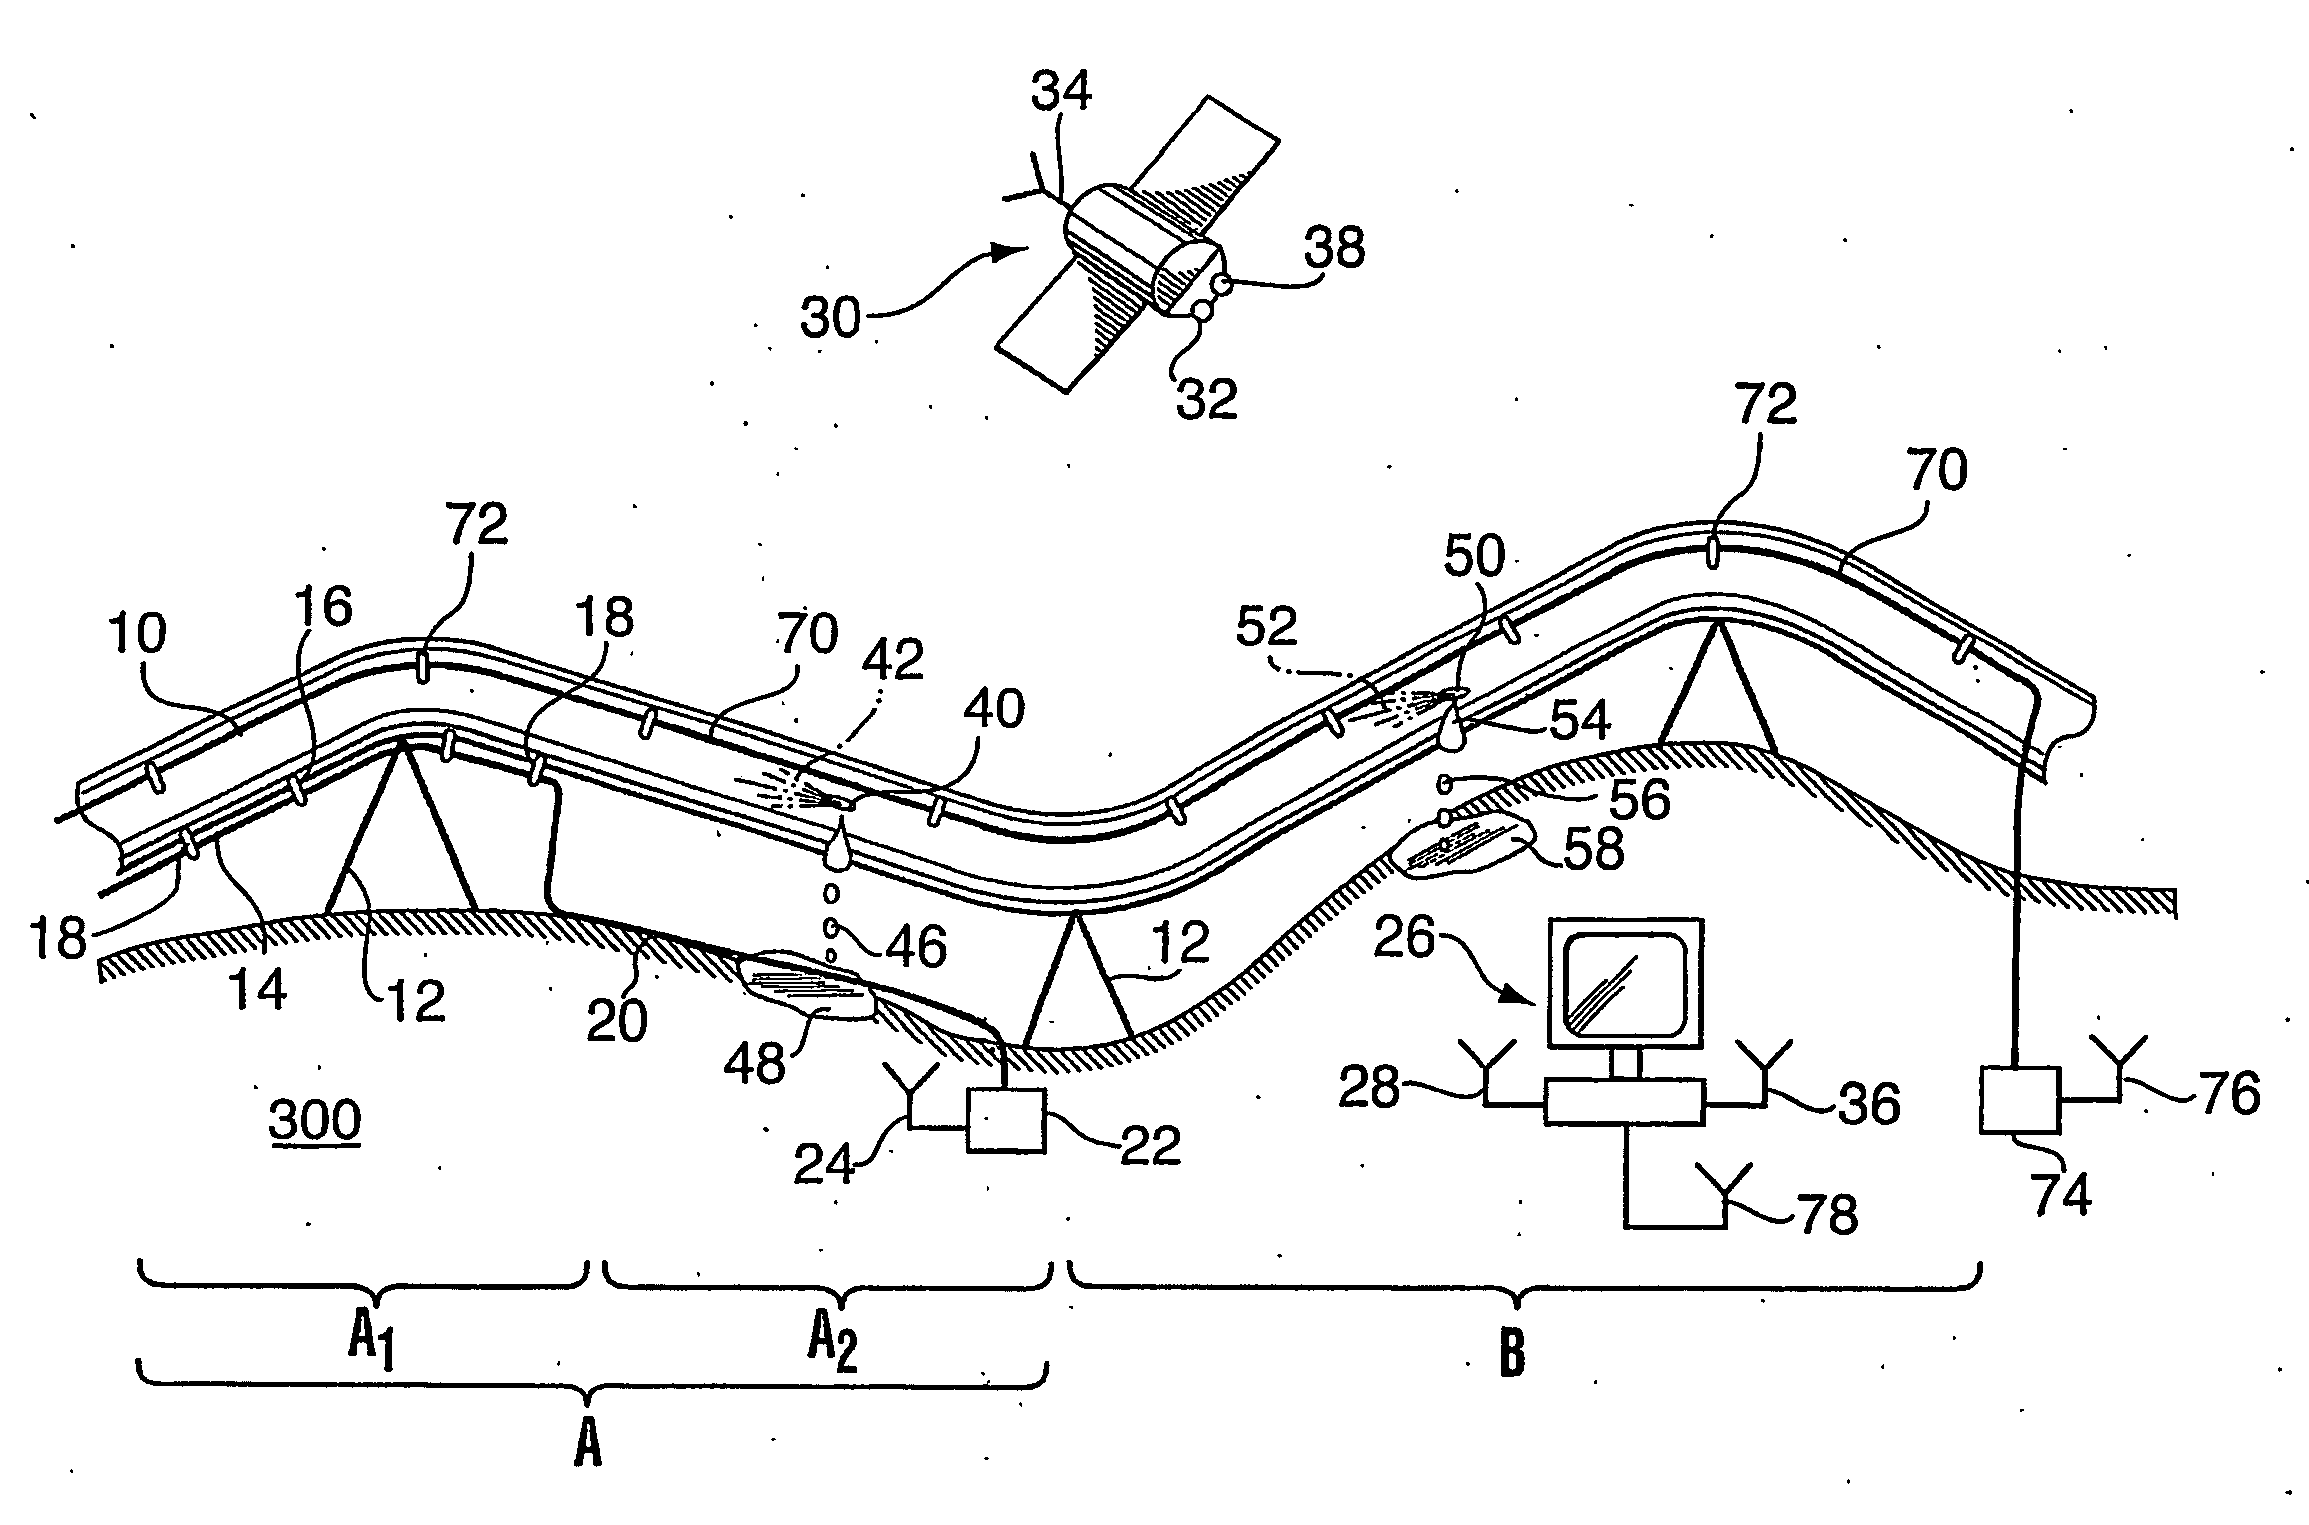 Pipeline monitoring system